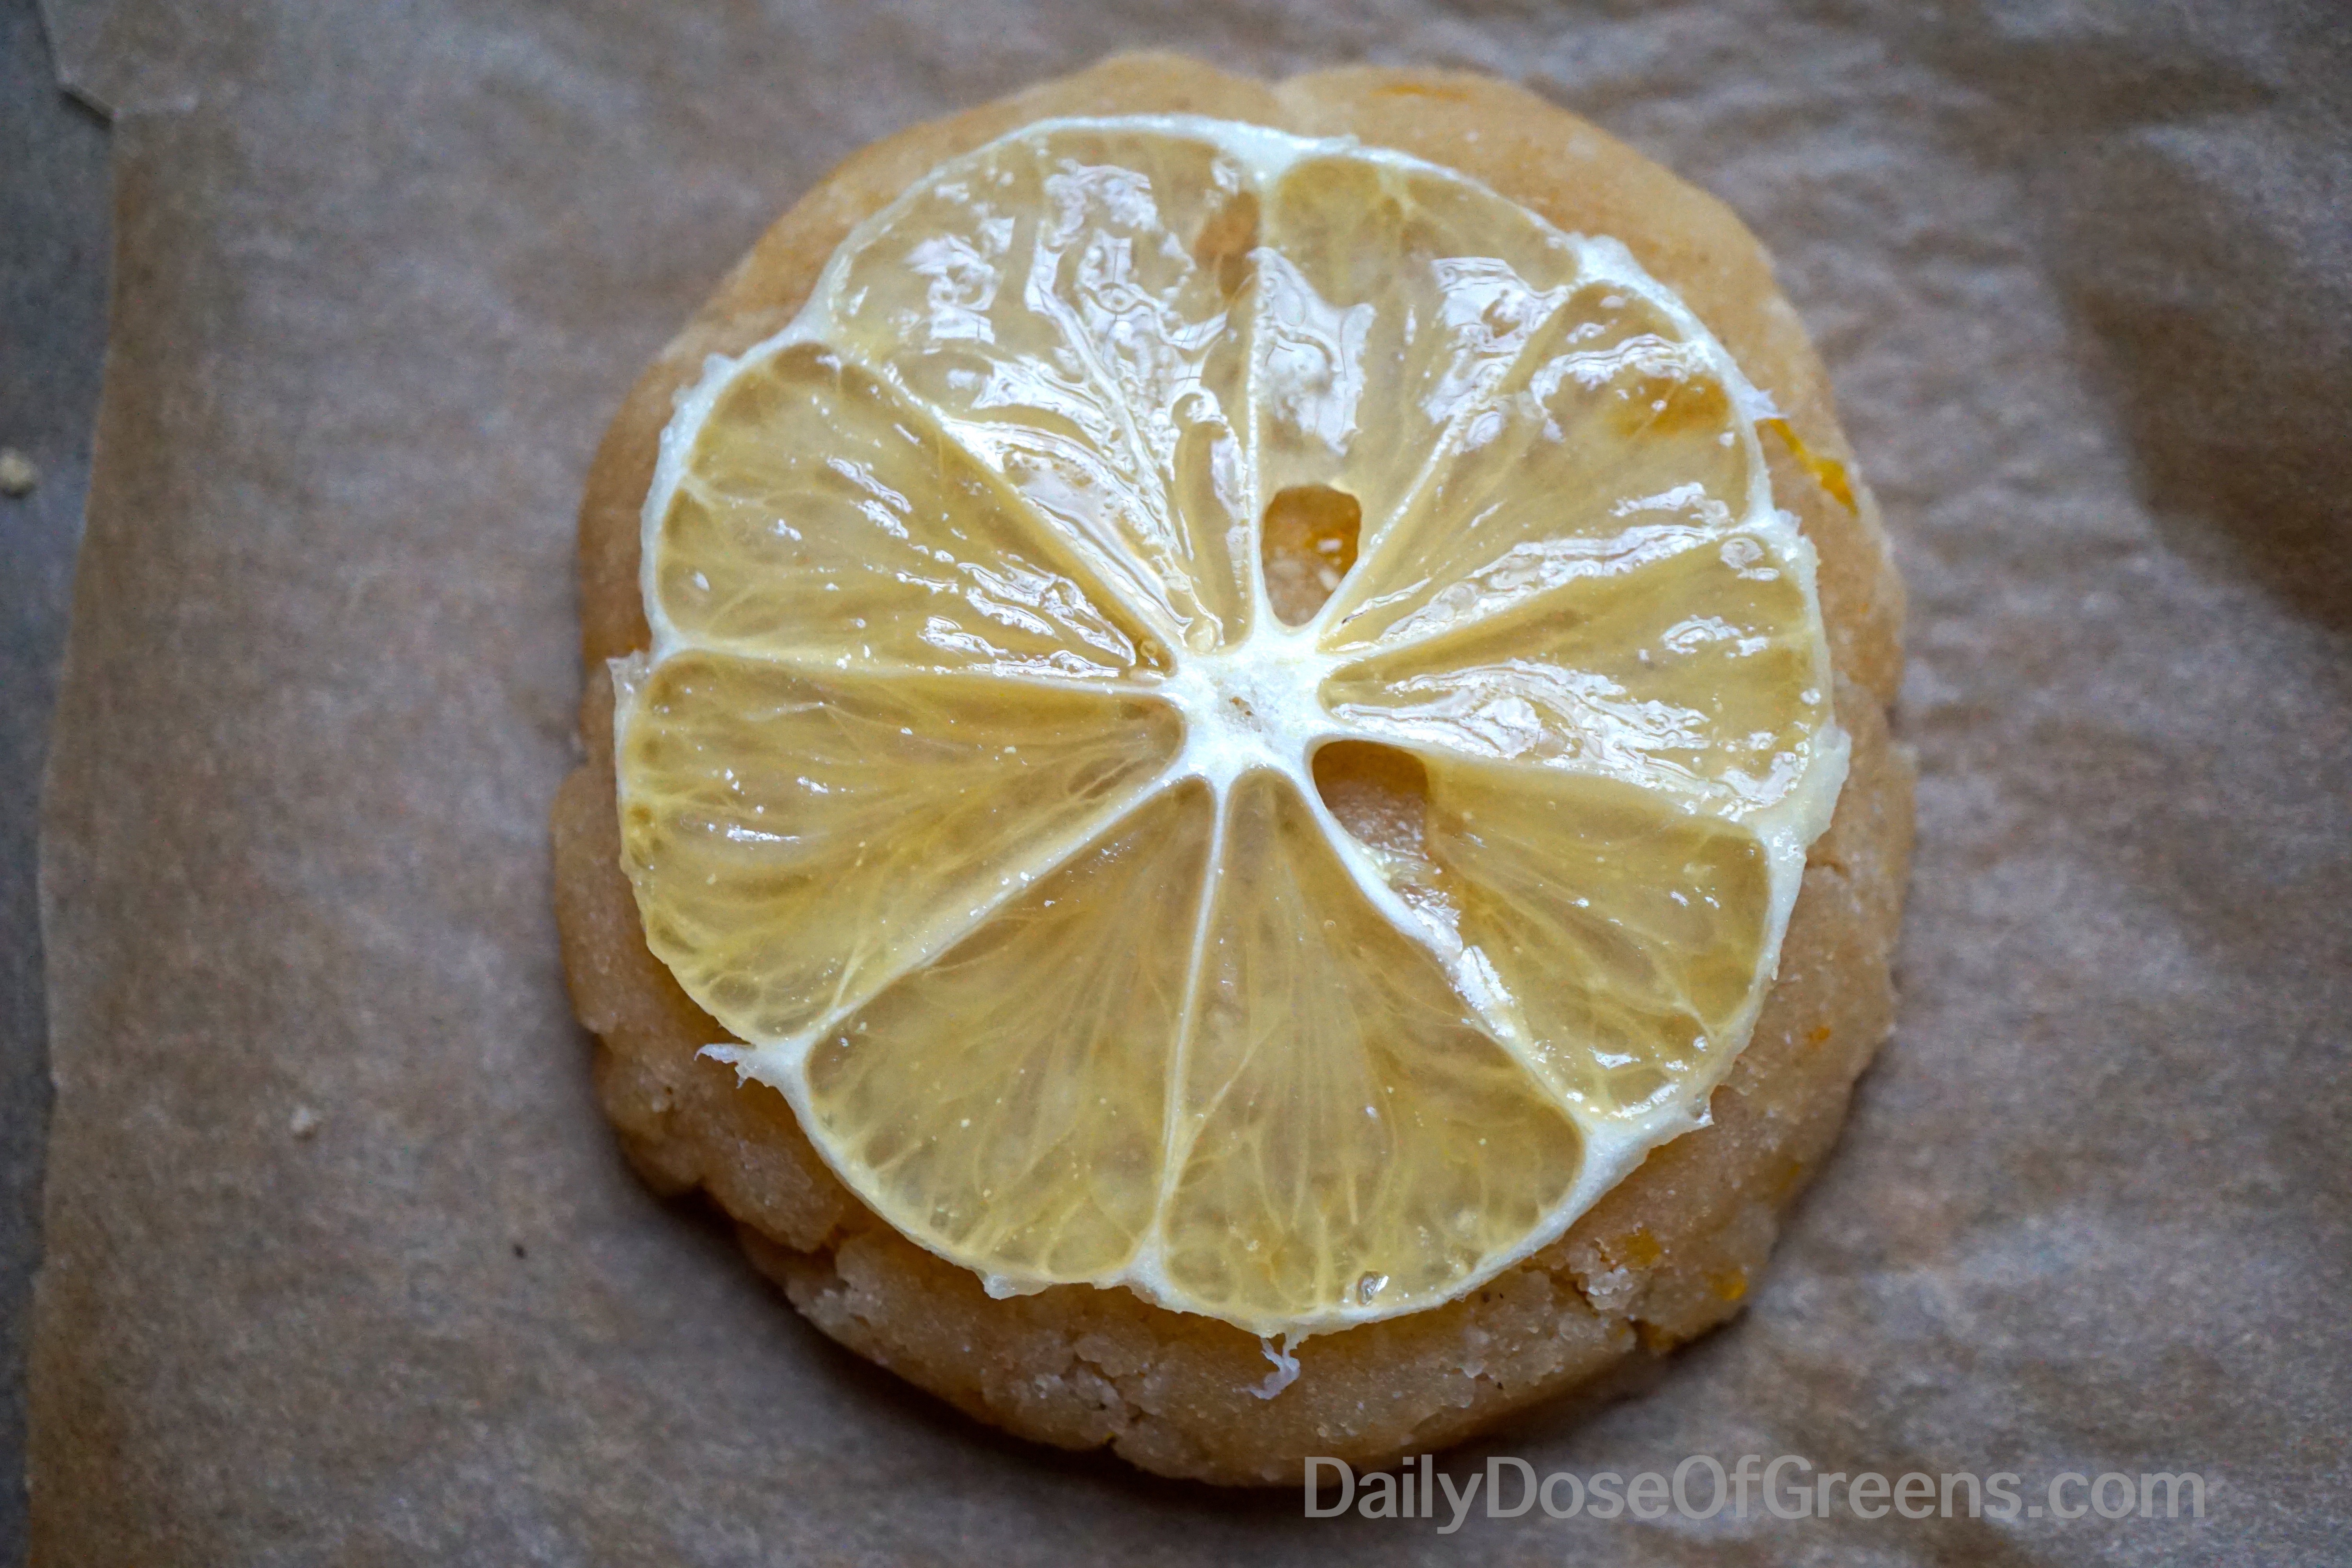 Citrus Tea Cookie topped with a Meyer lemon prior to baking